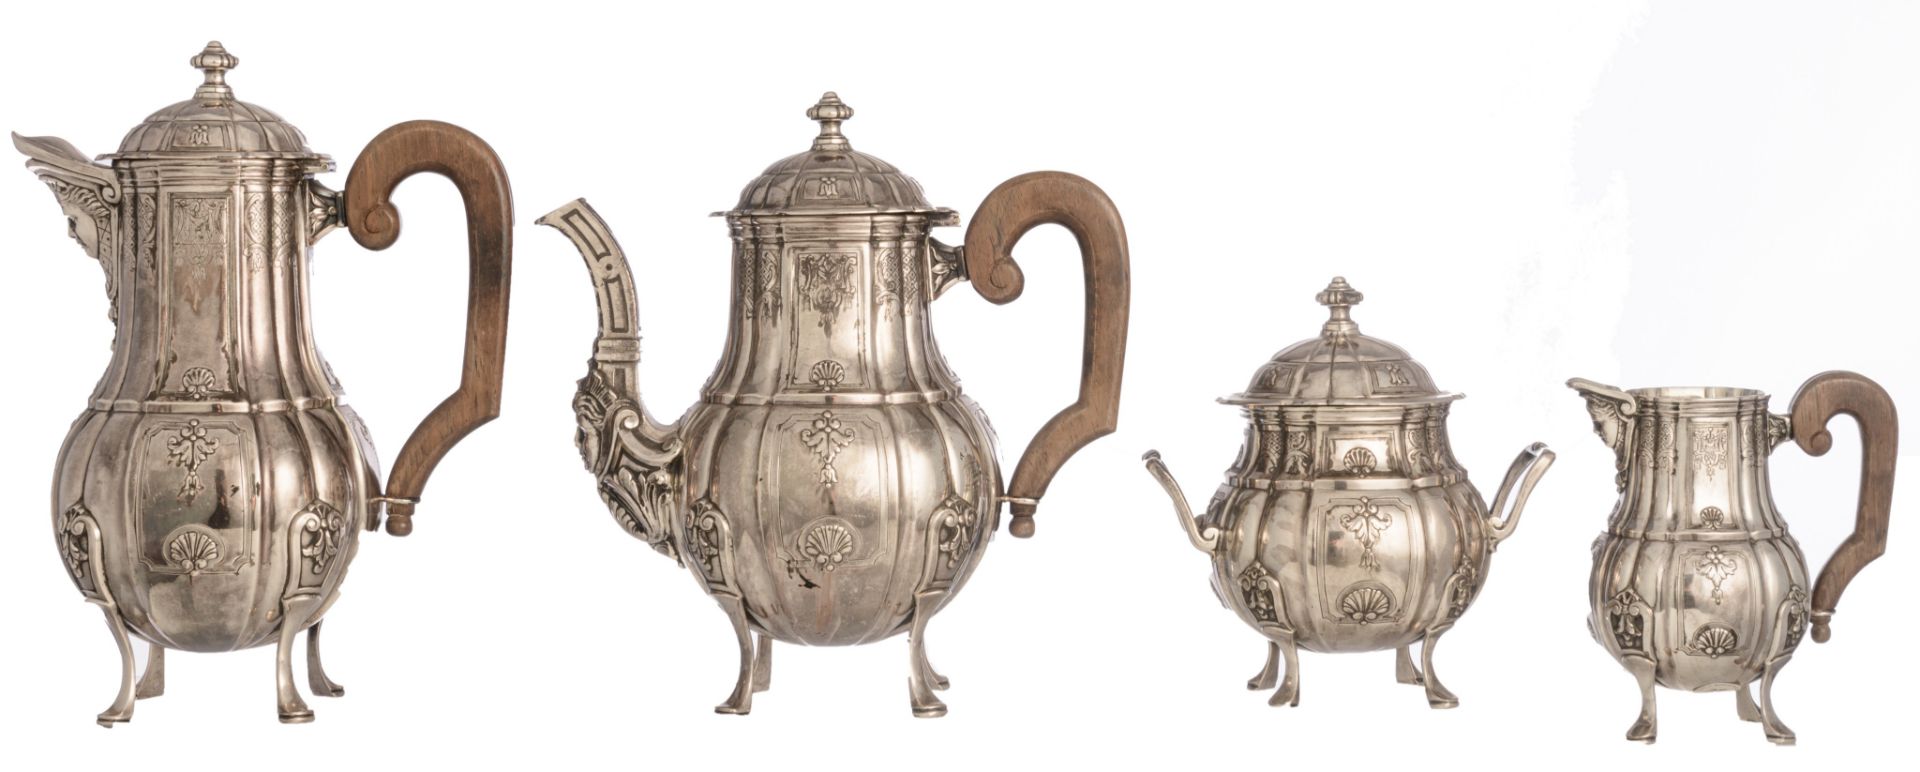 A four-part Belgian silver coffee and tea set, H 15 - 29 cm / total weight c. 4.290 g - Image 5 of 13